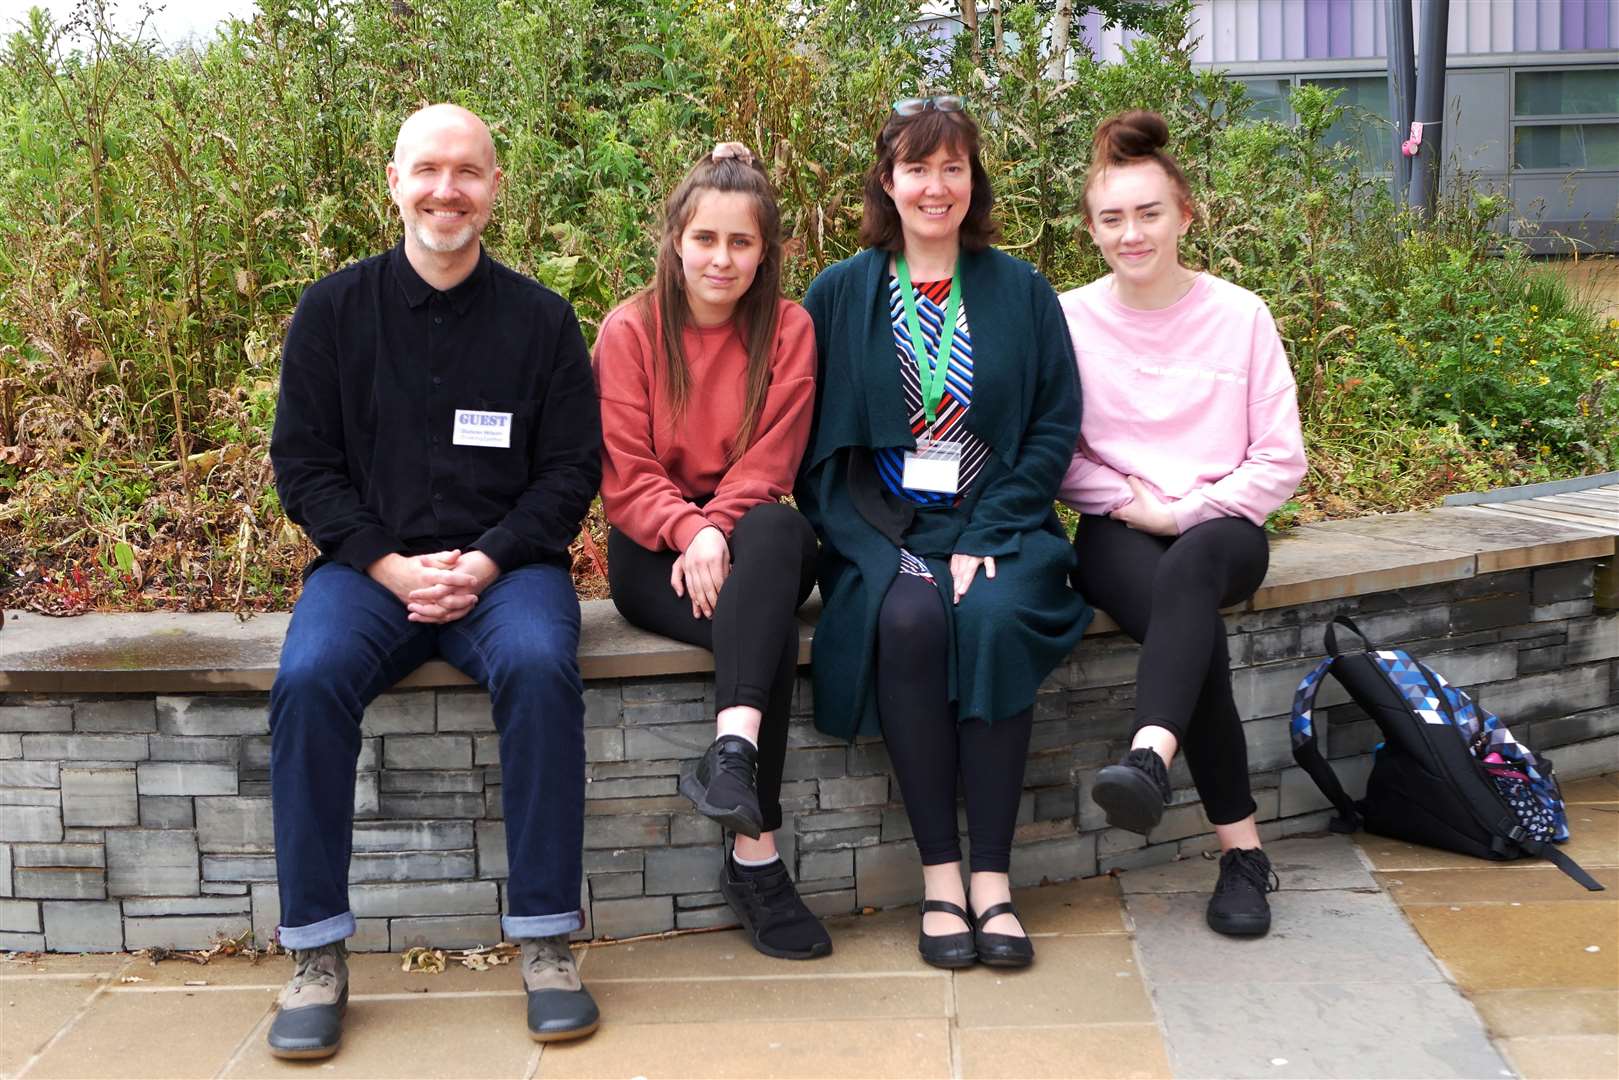 Yasmeen Martin (second from left) and Chloe Corr (right) with Duncan Wilson and Karen Higginbottom from Growing 2gether.